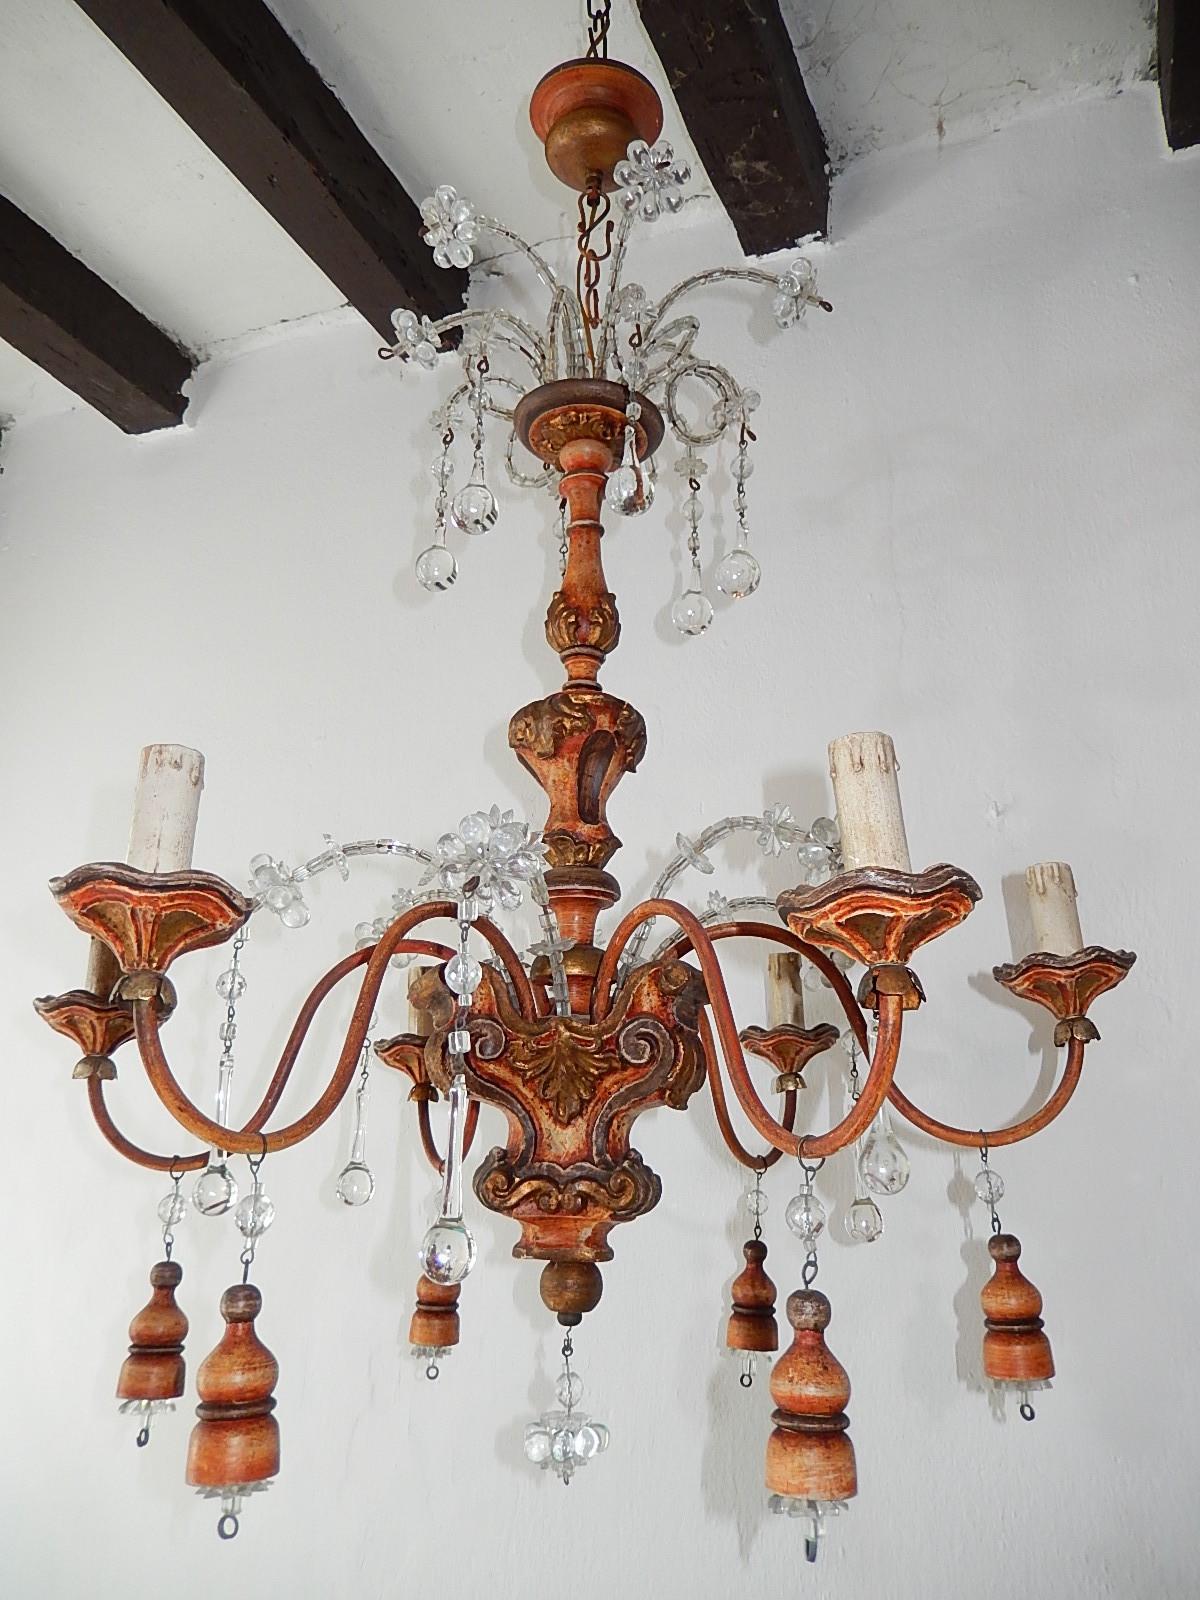 Housing 6 lights sitting in original painted wooden posts. Hand carved gold and rust color wood with metal arms. Beaded top with florets and clear Murano drops. Crystal macaroni with wooden tassels as well. Will be newly rewired with certified US UL